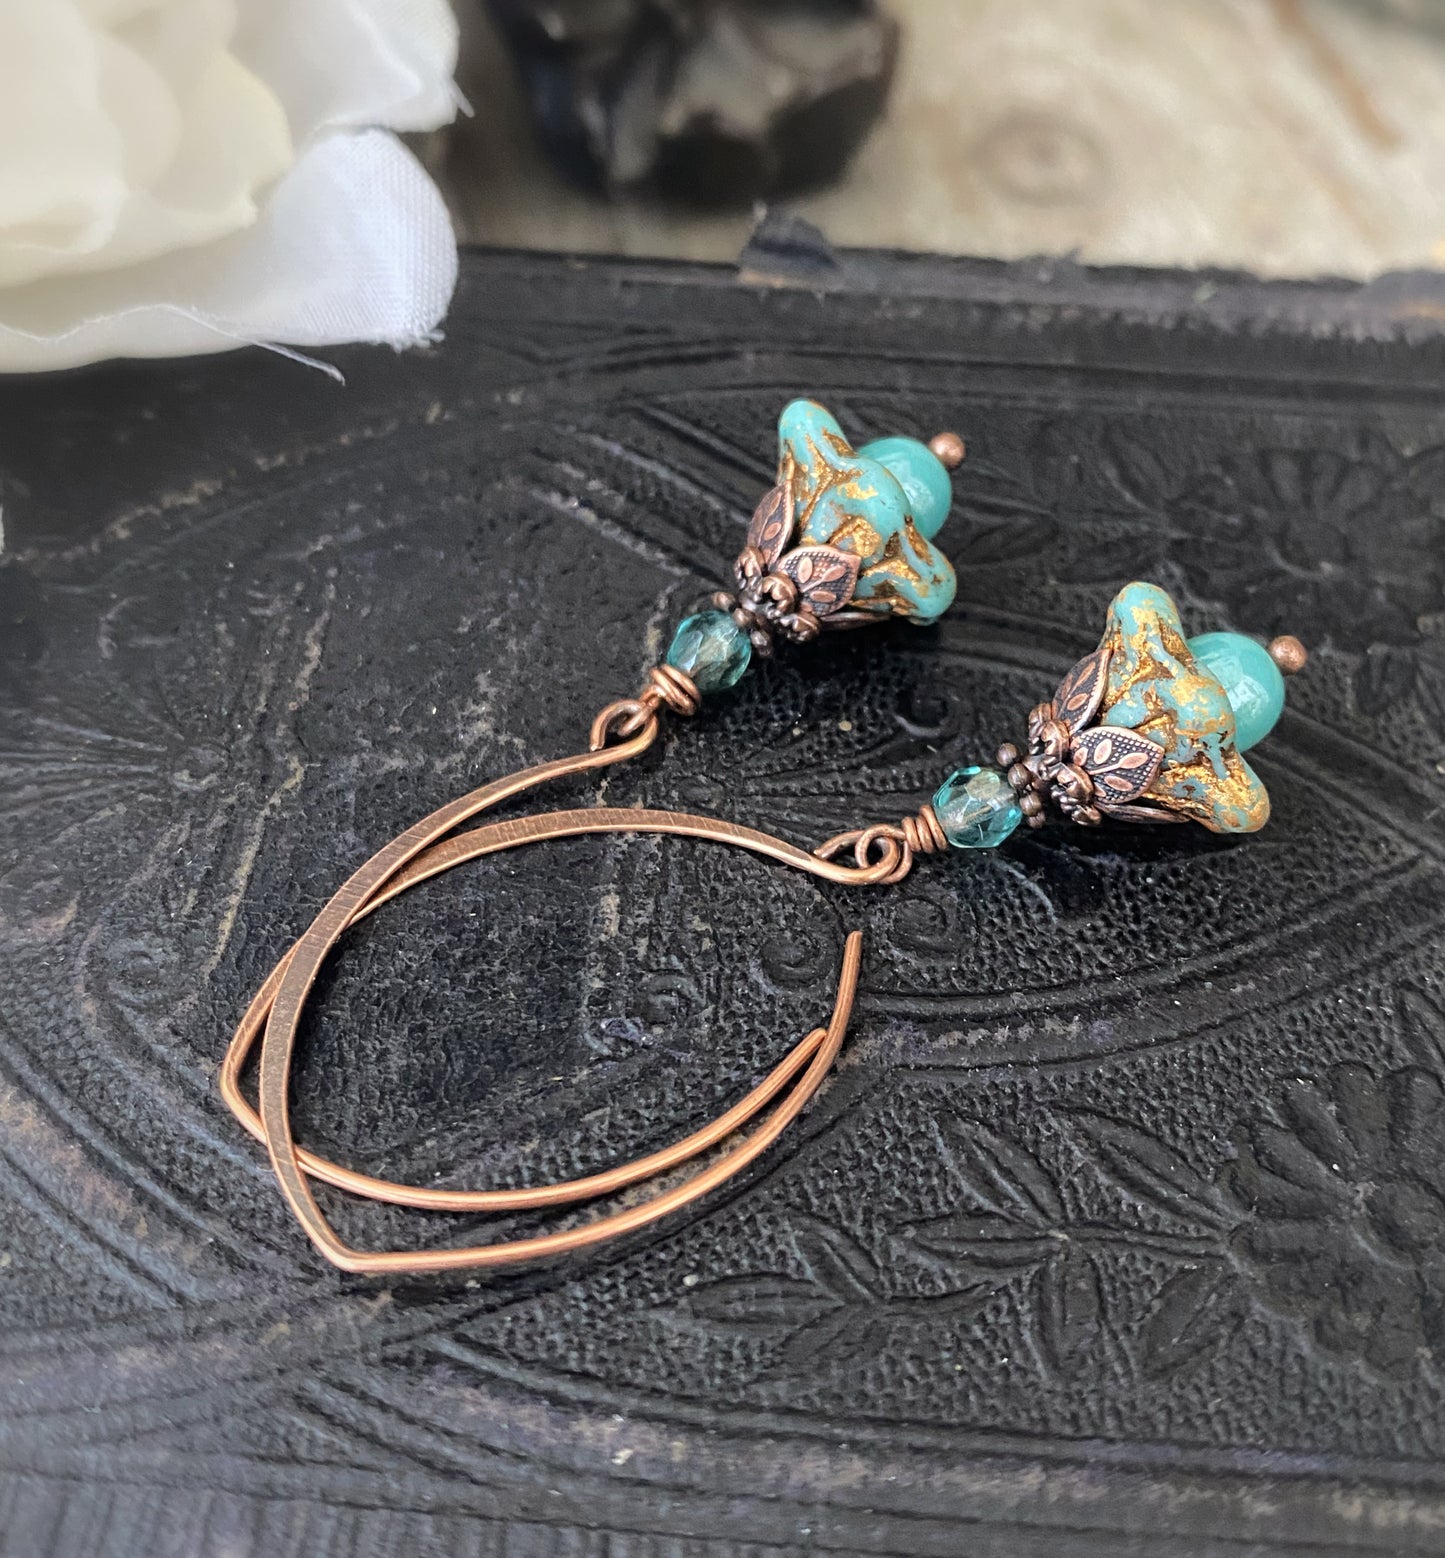 Turquoise Czech glass and pearls. Copper flower bead caps, bronze metal, earrings